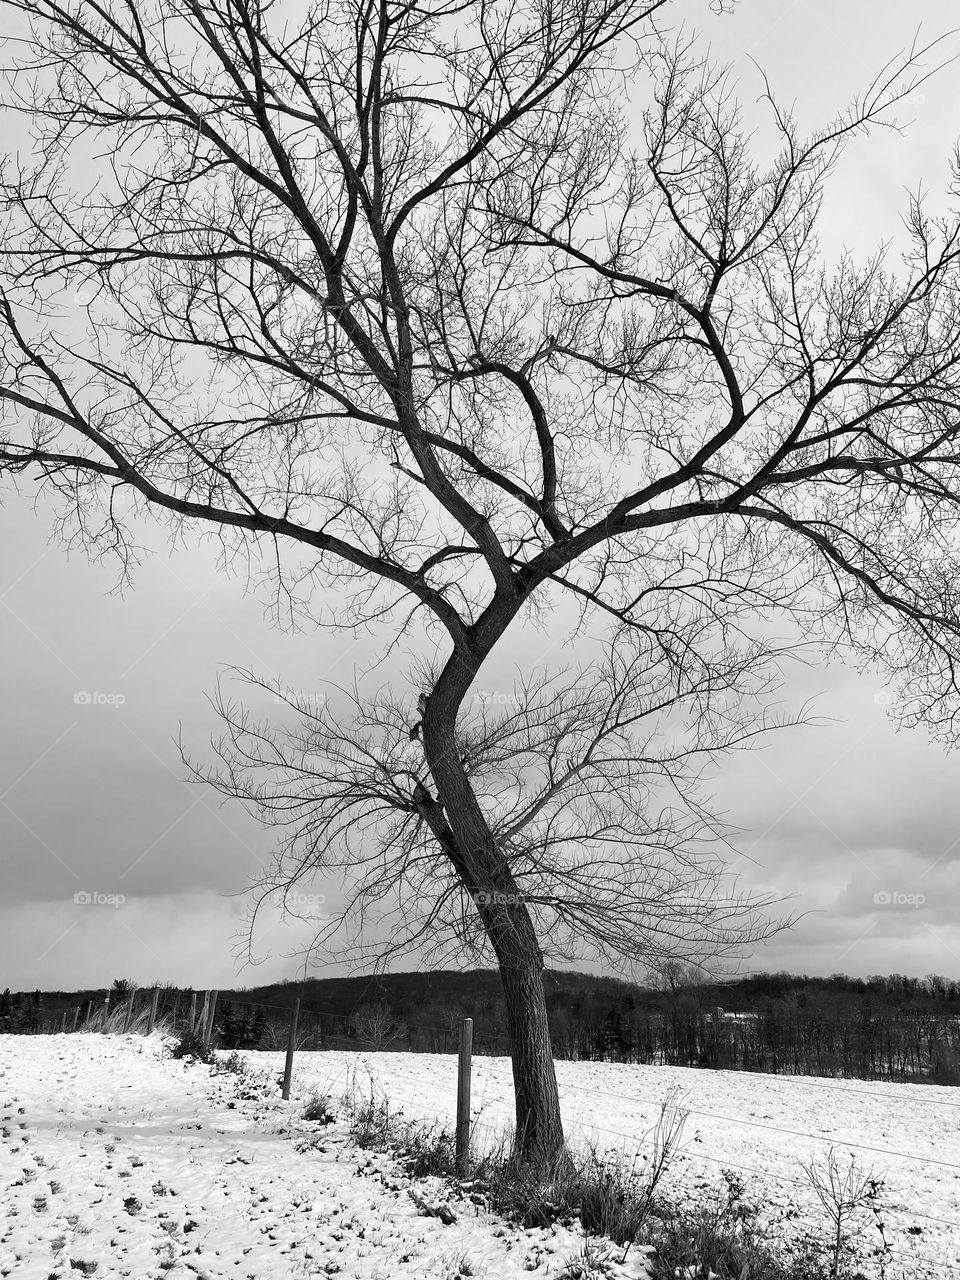 A tree along a fence line in the snow